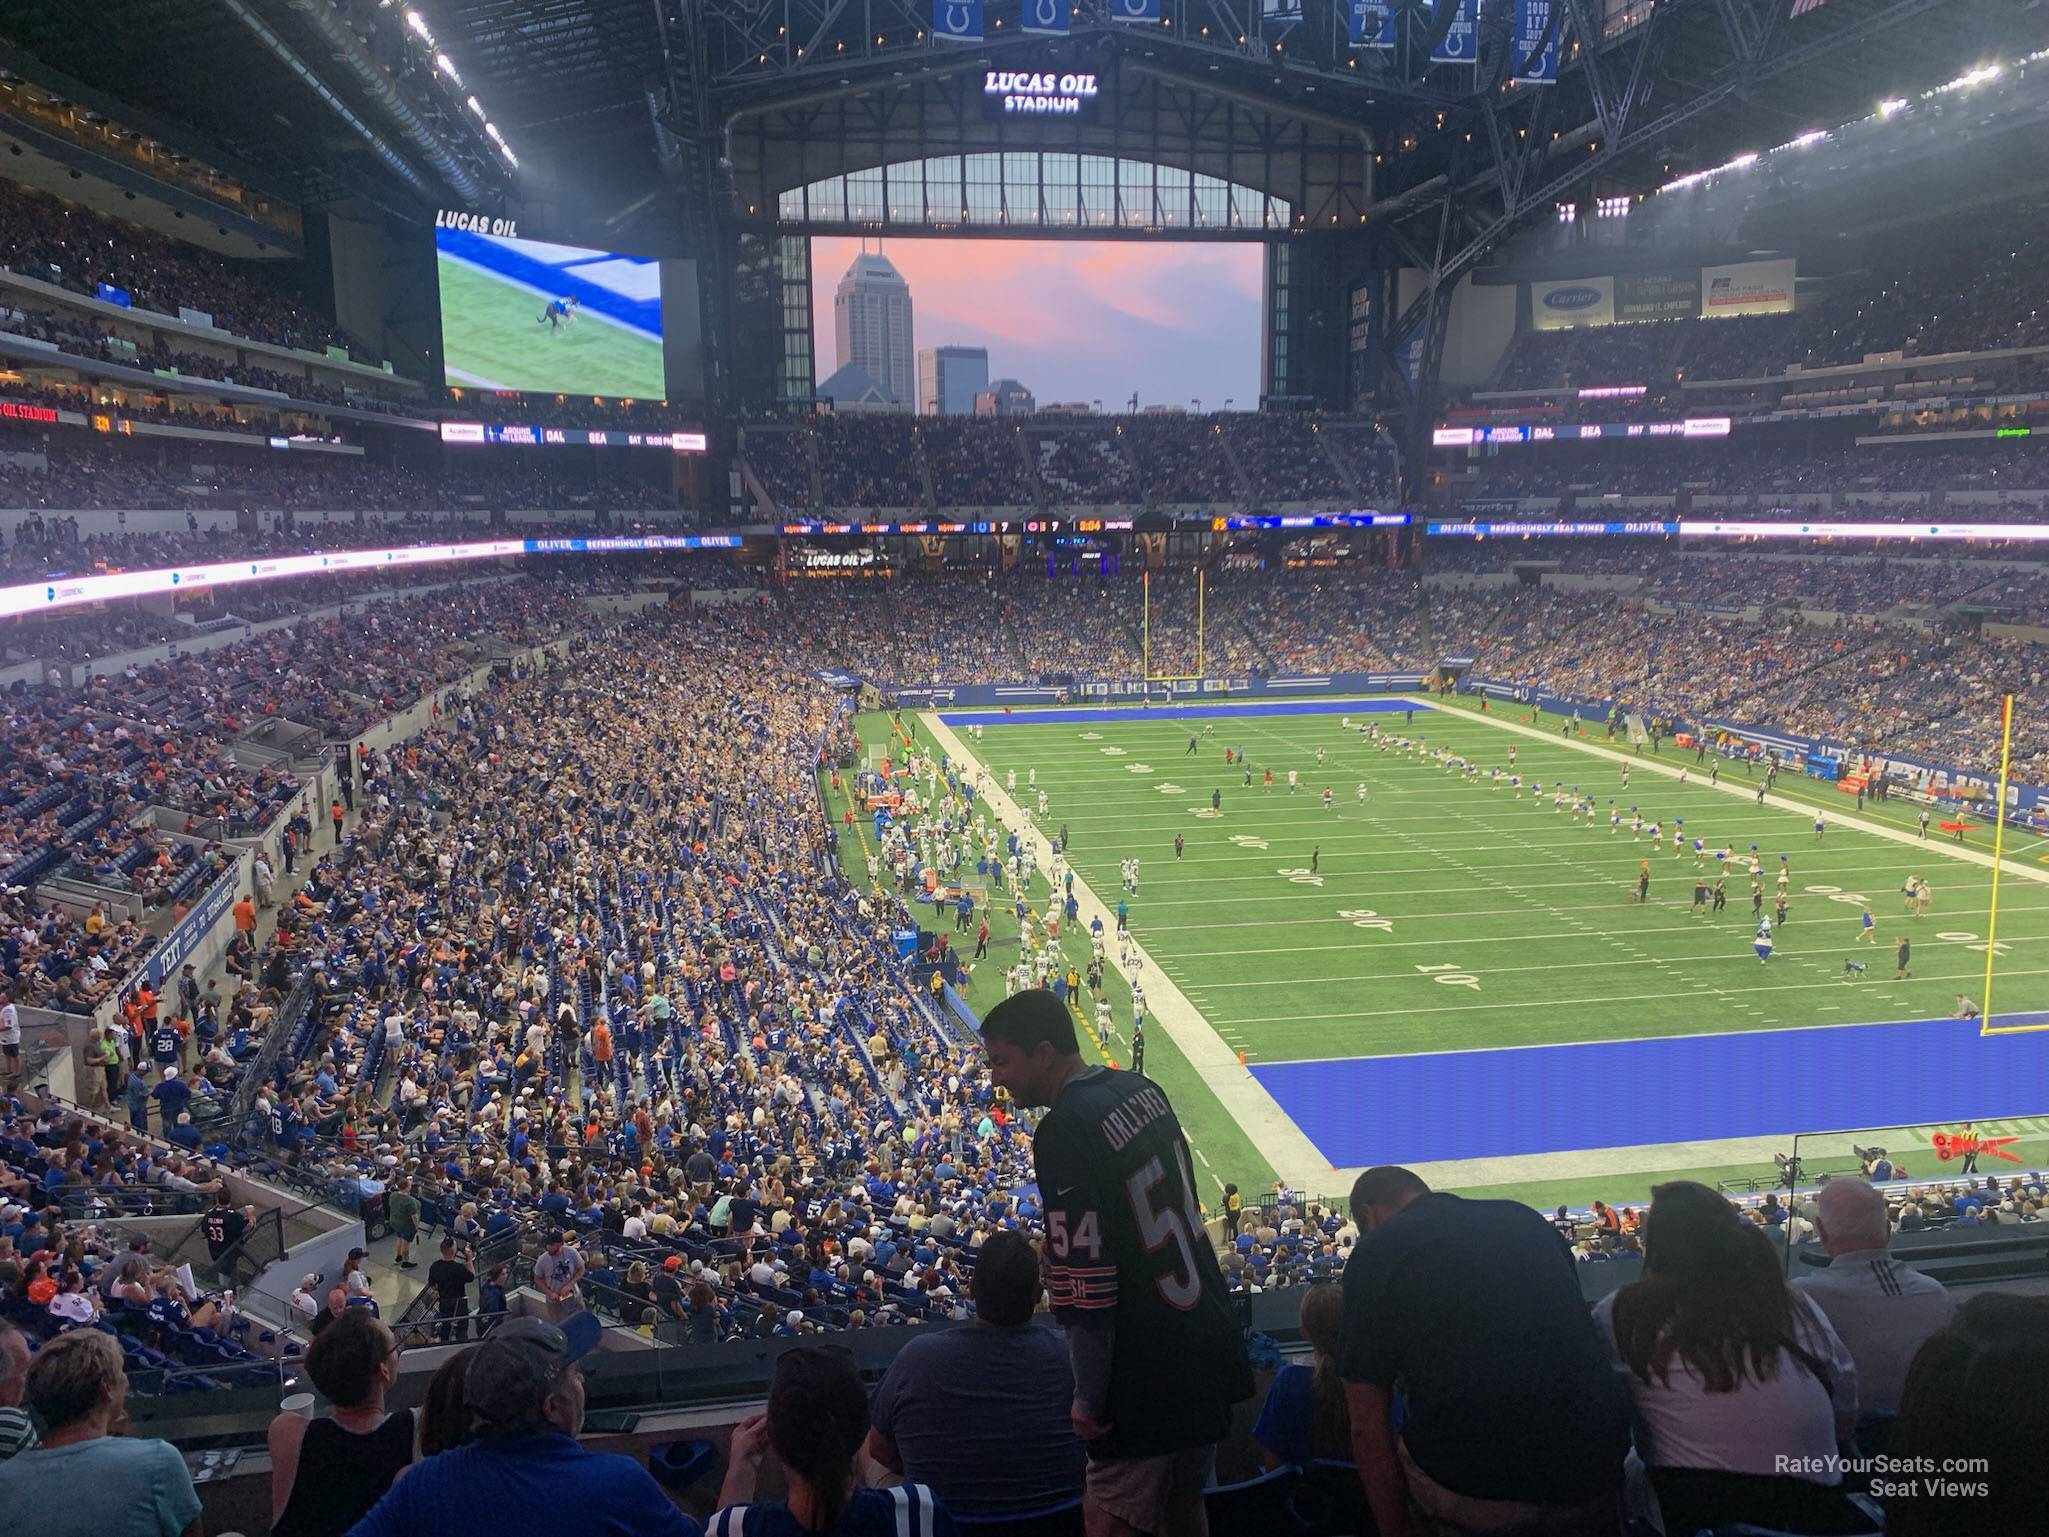 section 330, row 5n seat view  for football - lucas oil stadium